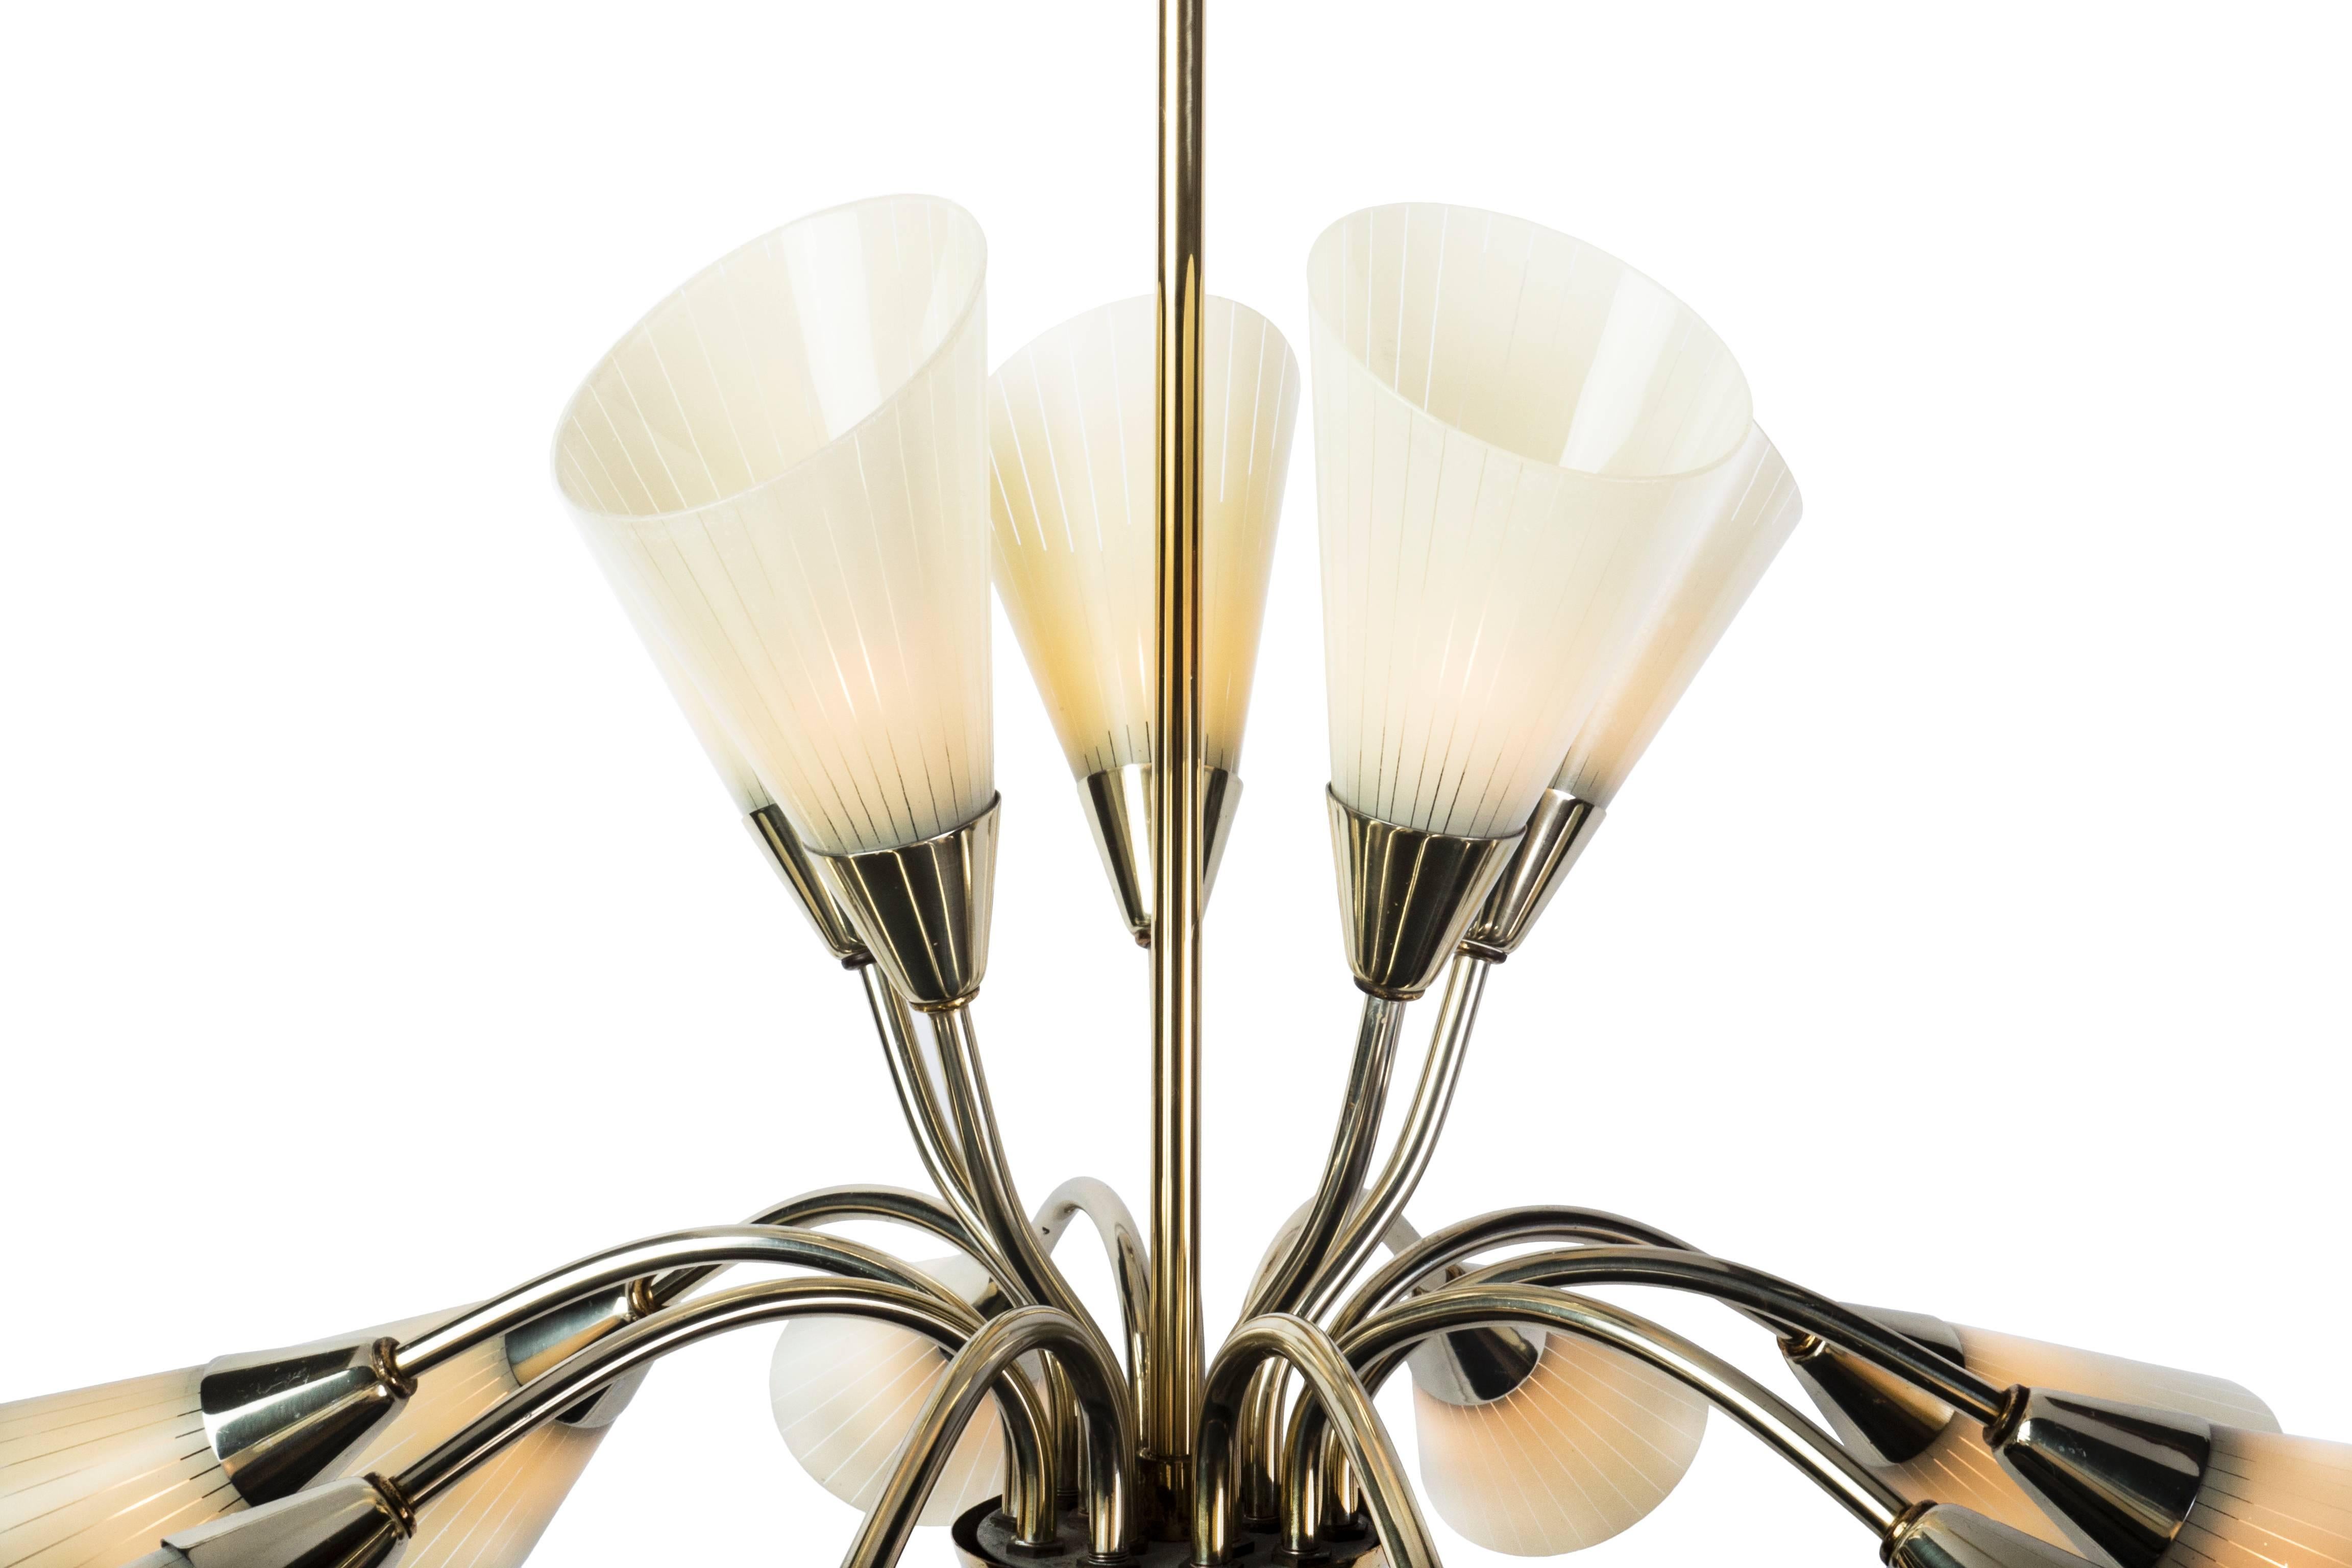 French Sensational Mid-Century Modernist Tulip Chandelier in the Manner of Adnet For Sale